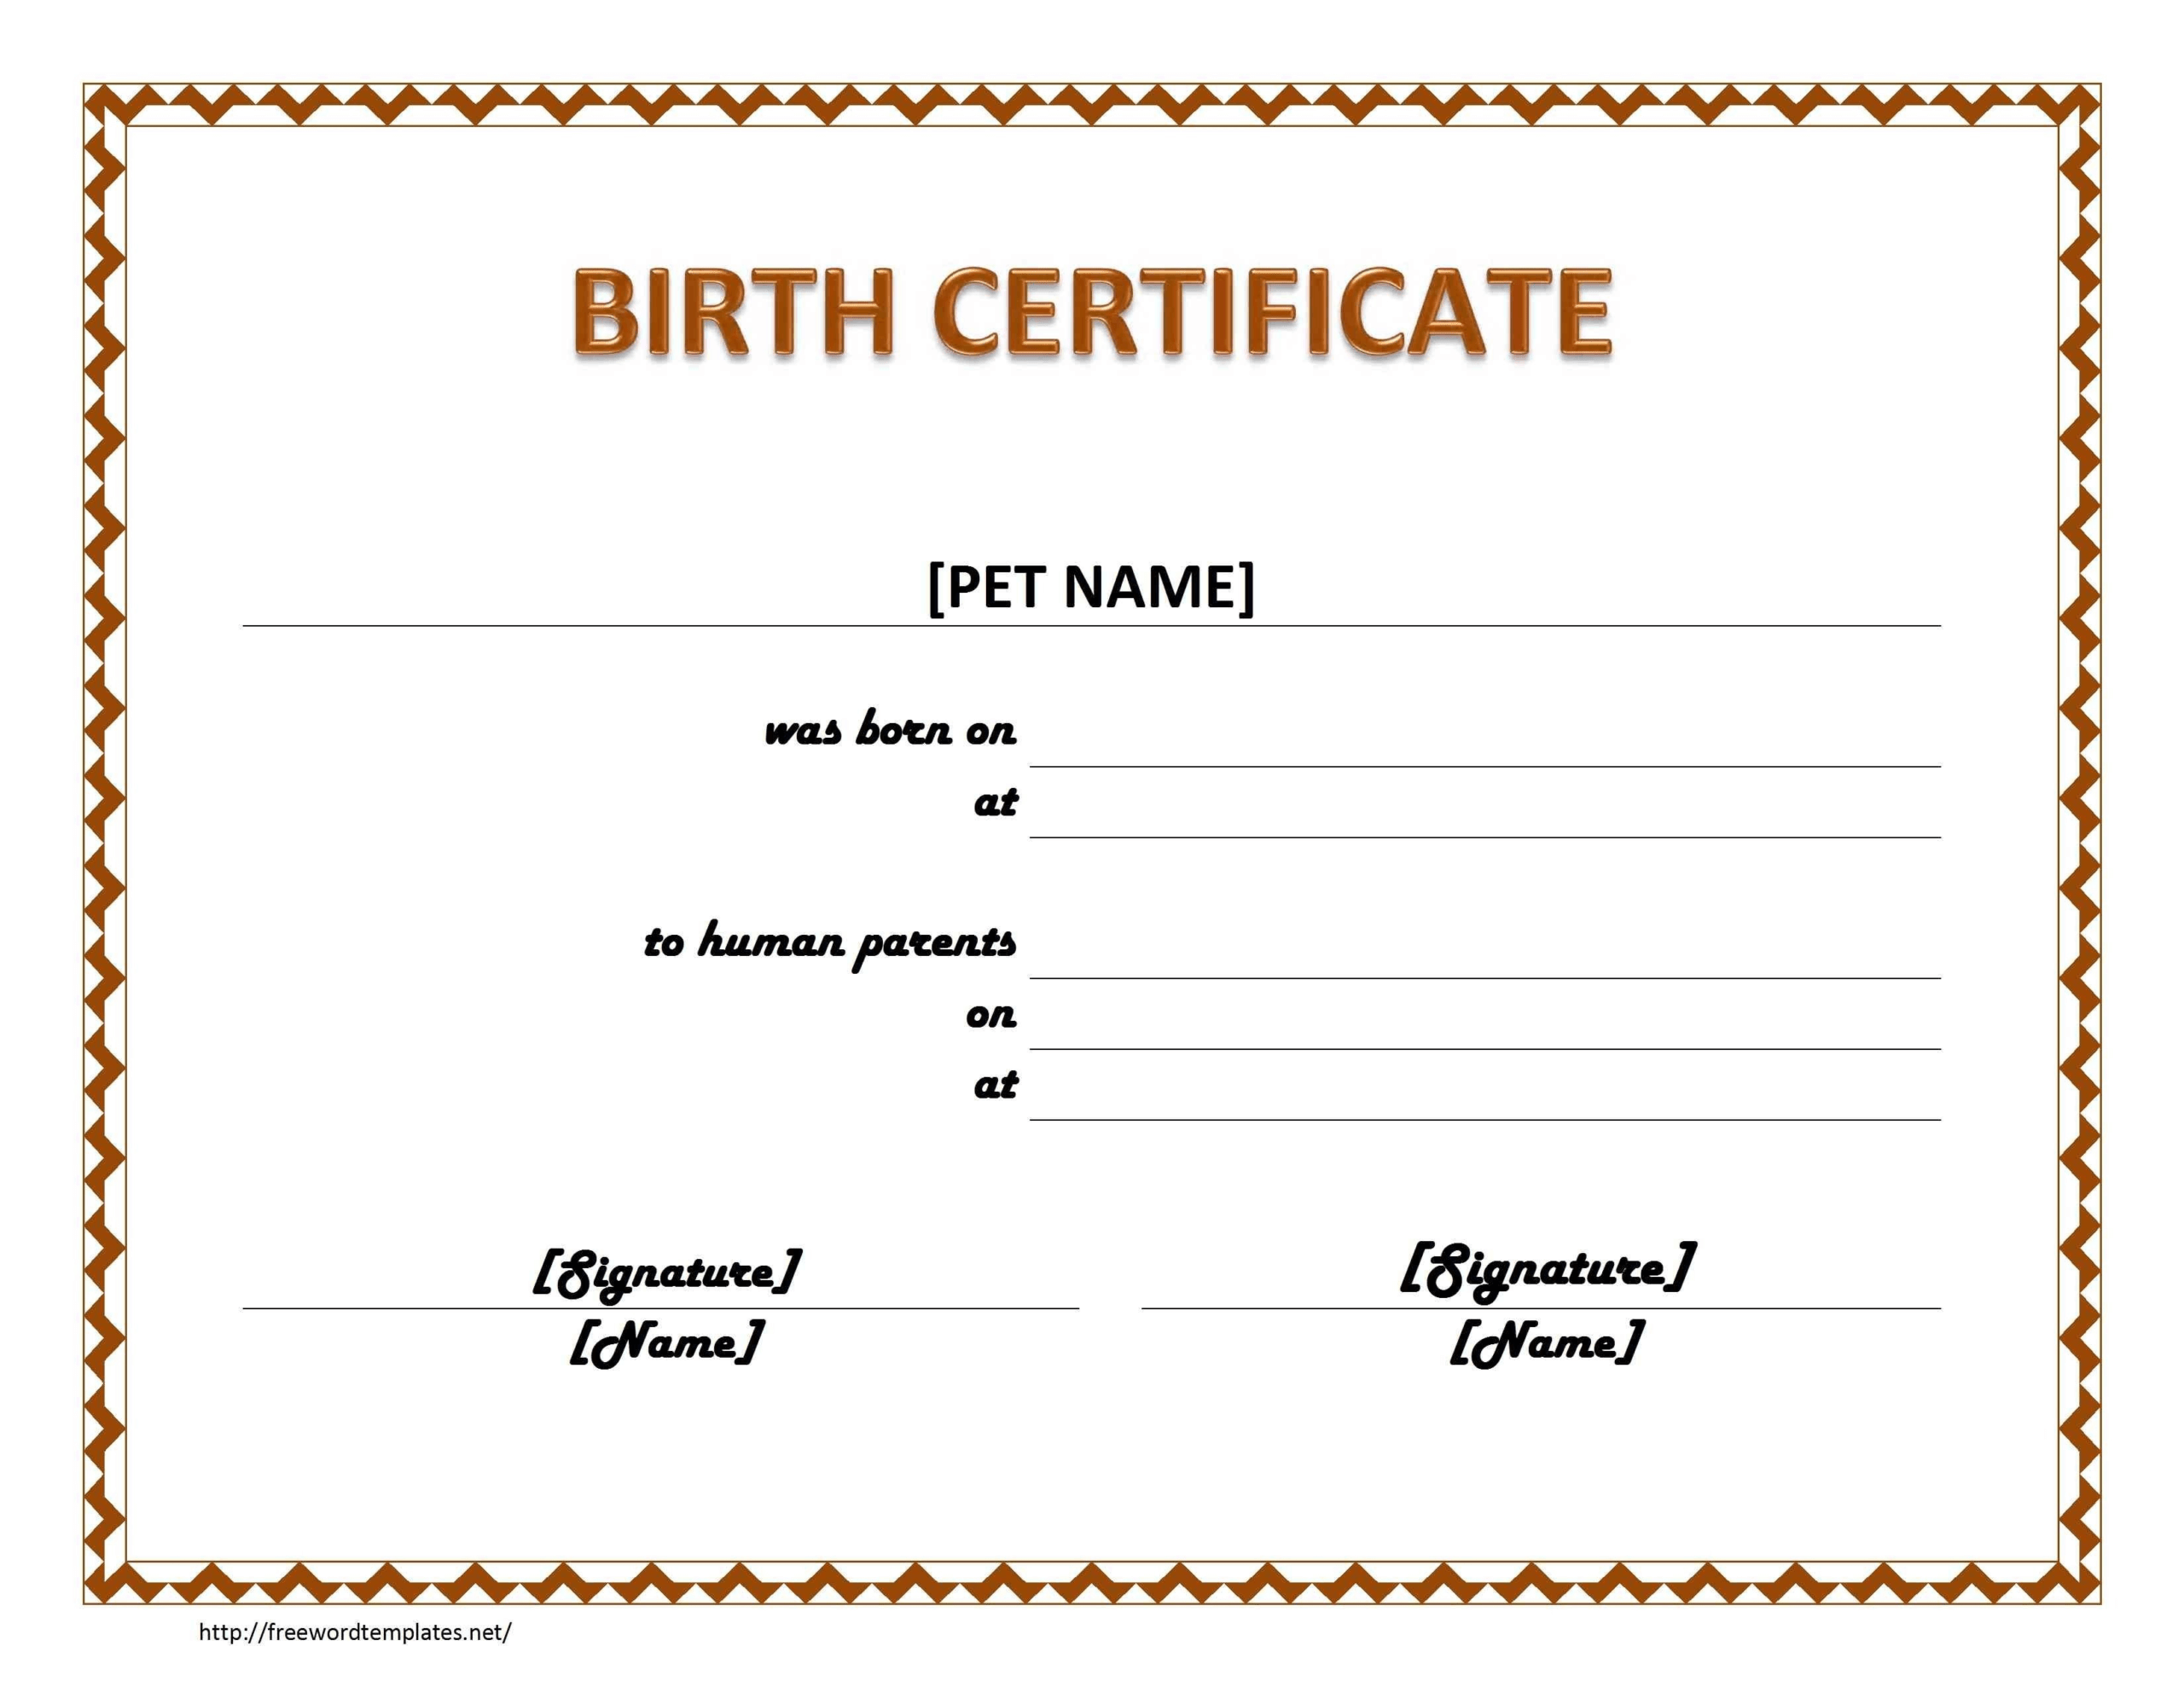 Blank Birth Certificate Template For Elements Novelty Images With Novelty Birth Certificate Template